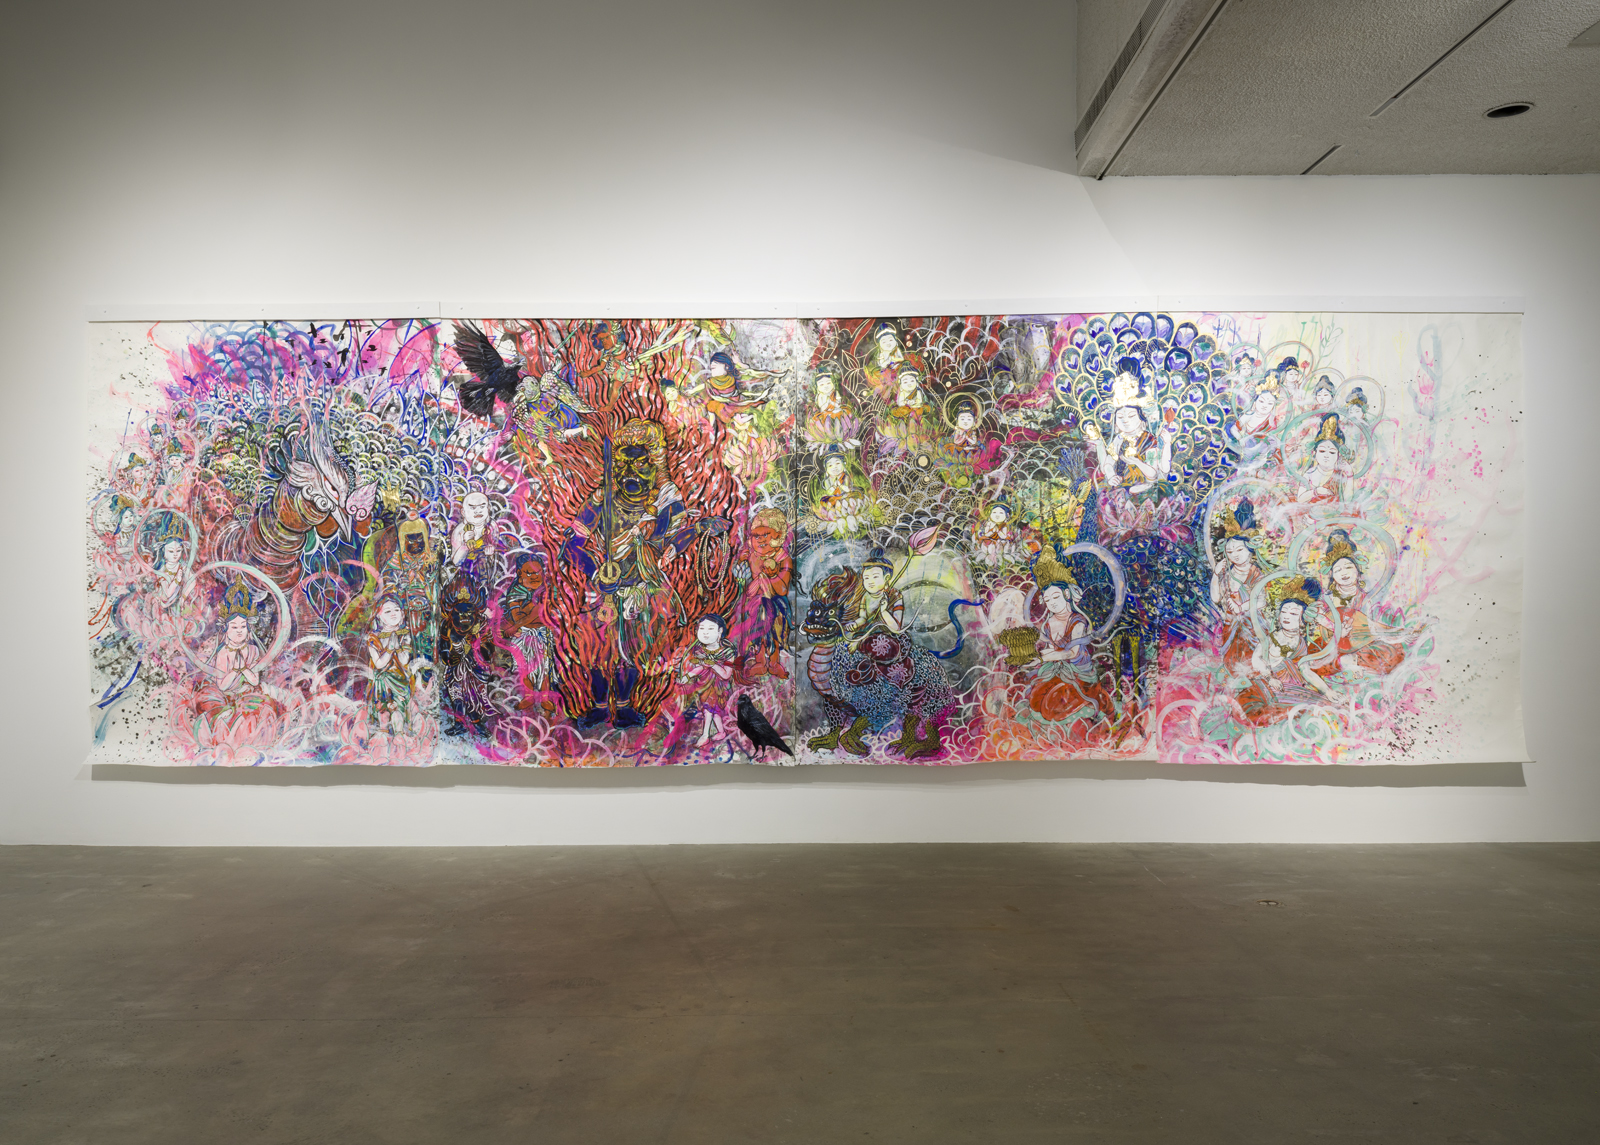 Wakana Kimura, LA MANDALA, 2023, watercolor, sumi ink, marker, acrylic color, vinyl color on paper, 102 x 314 inches. Courtesy of the City of Los Angeles Department of Cultural Affairs / Los Angeles Municipal Art Gallery. Photo by Jeff McLane.